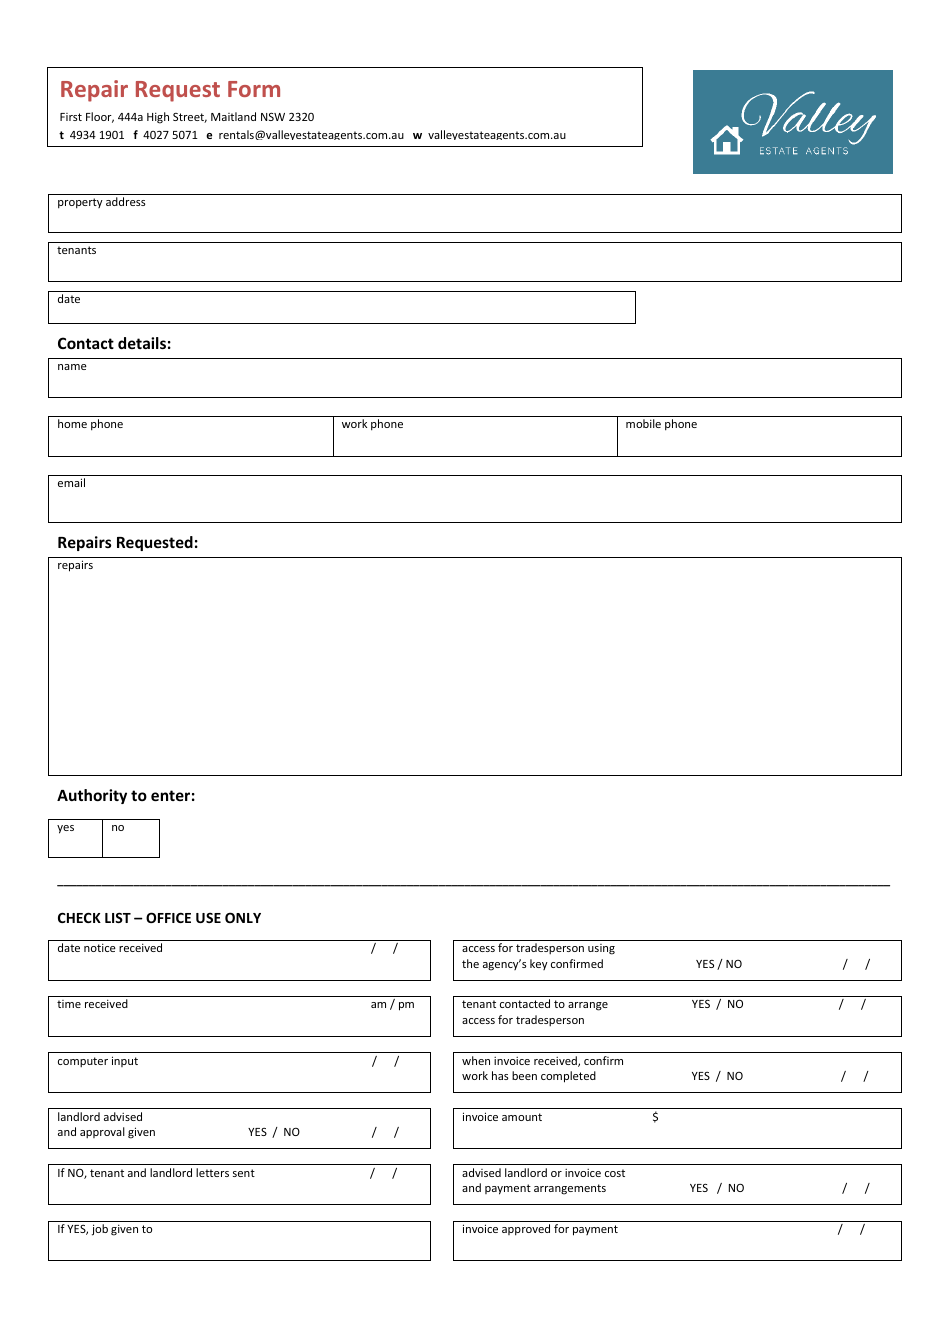 Repair Request Form - Valley Estate Agents, Page 1